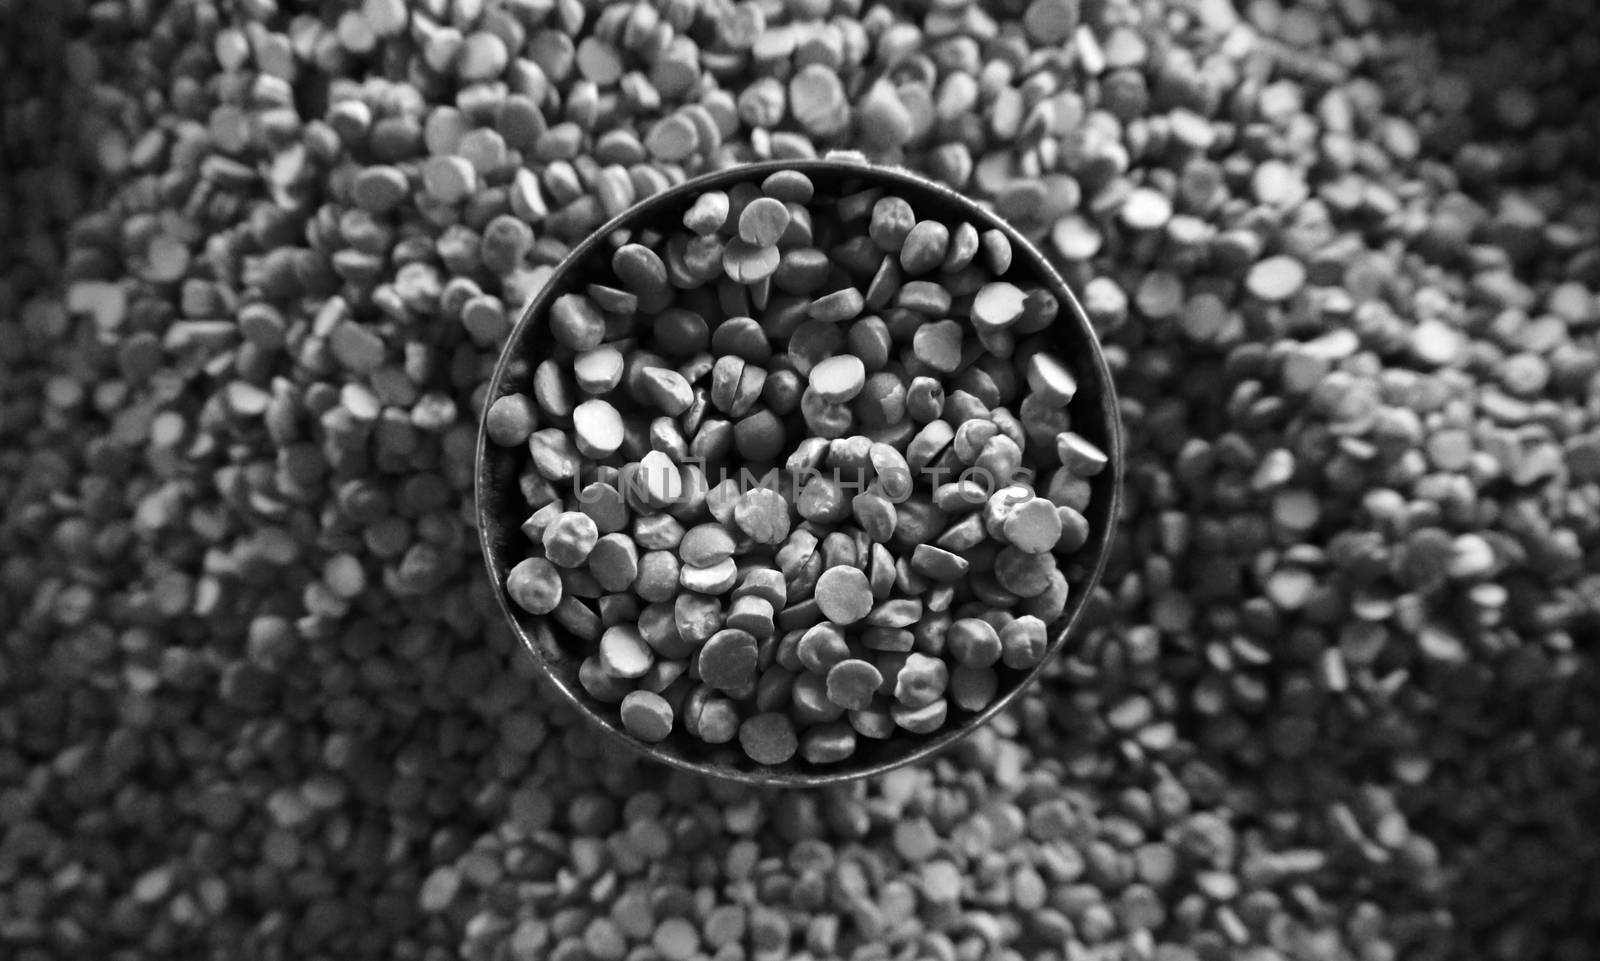 BLACK AND WHITE PHOTO OF CUP OF CHICK PEA